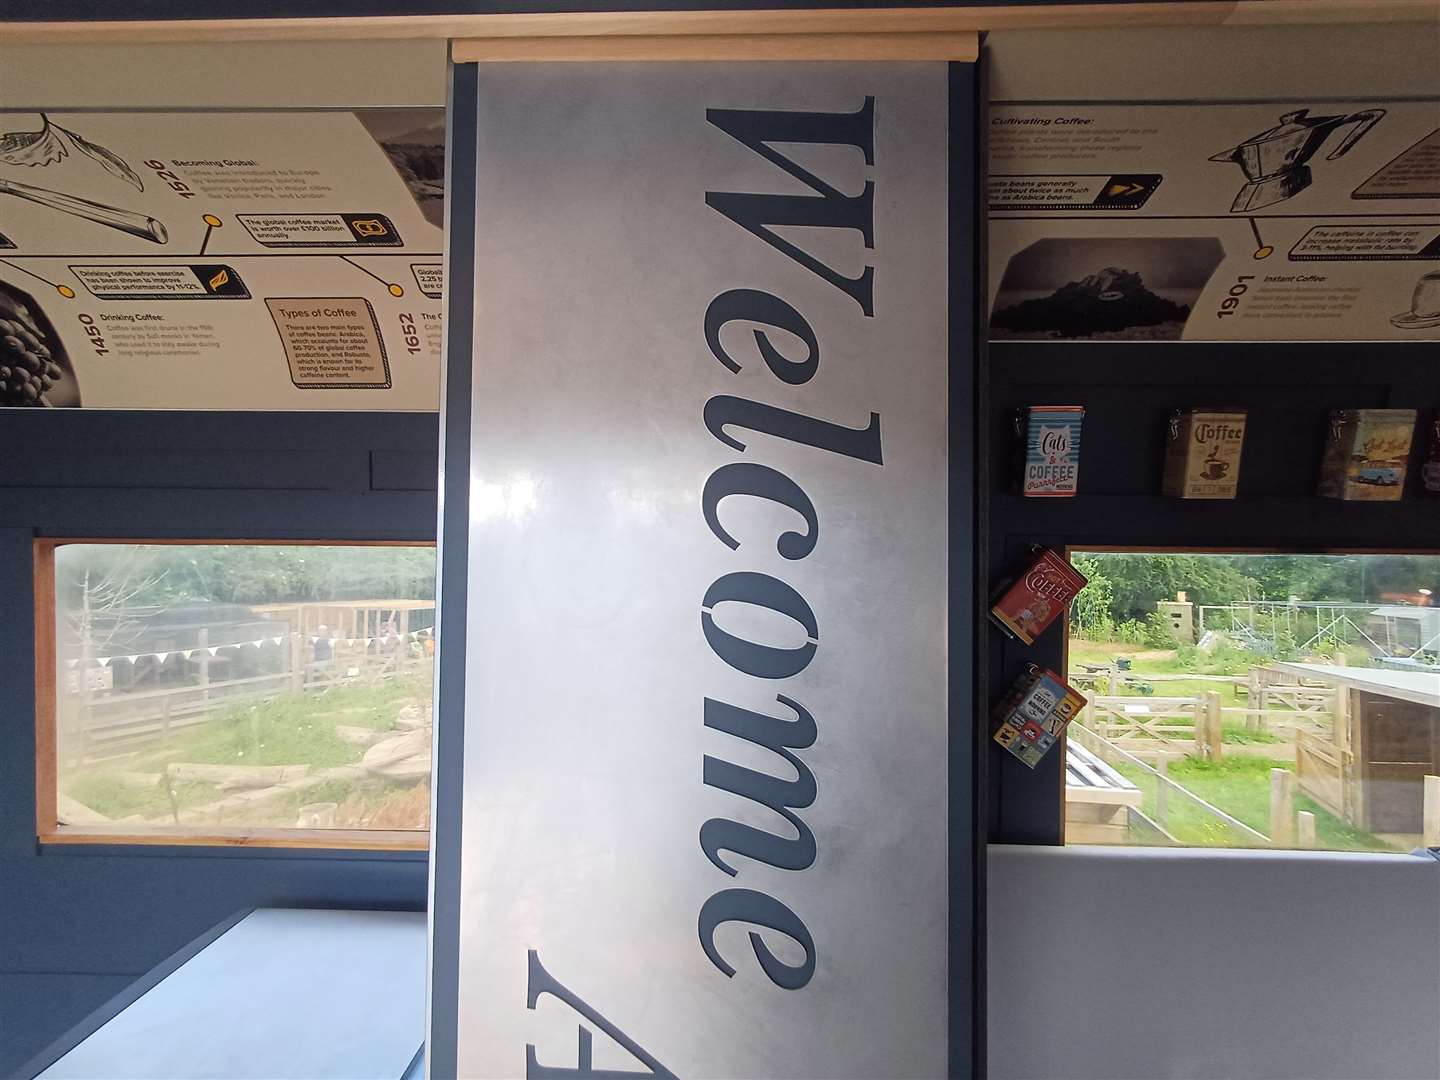 A welcome sign greets visitors as they enter the train